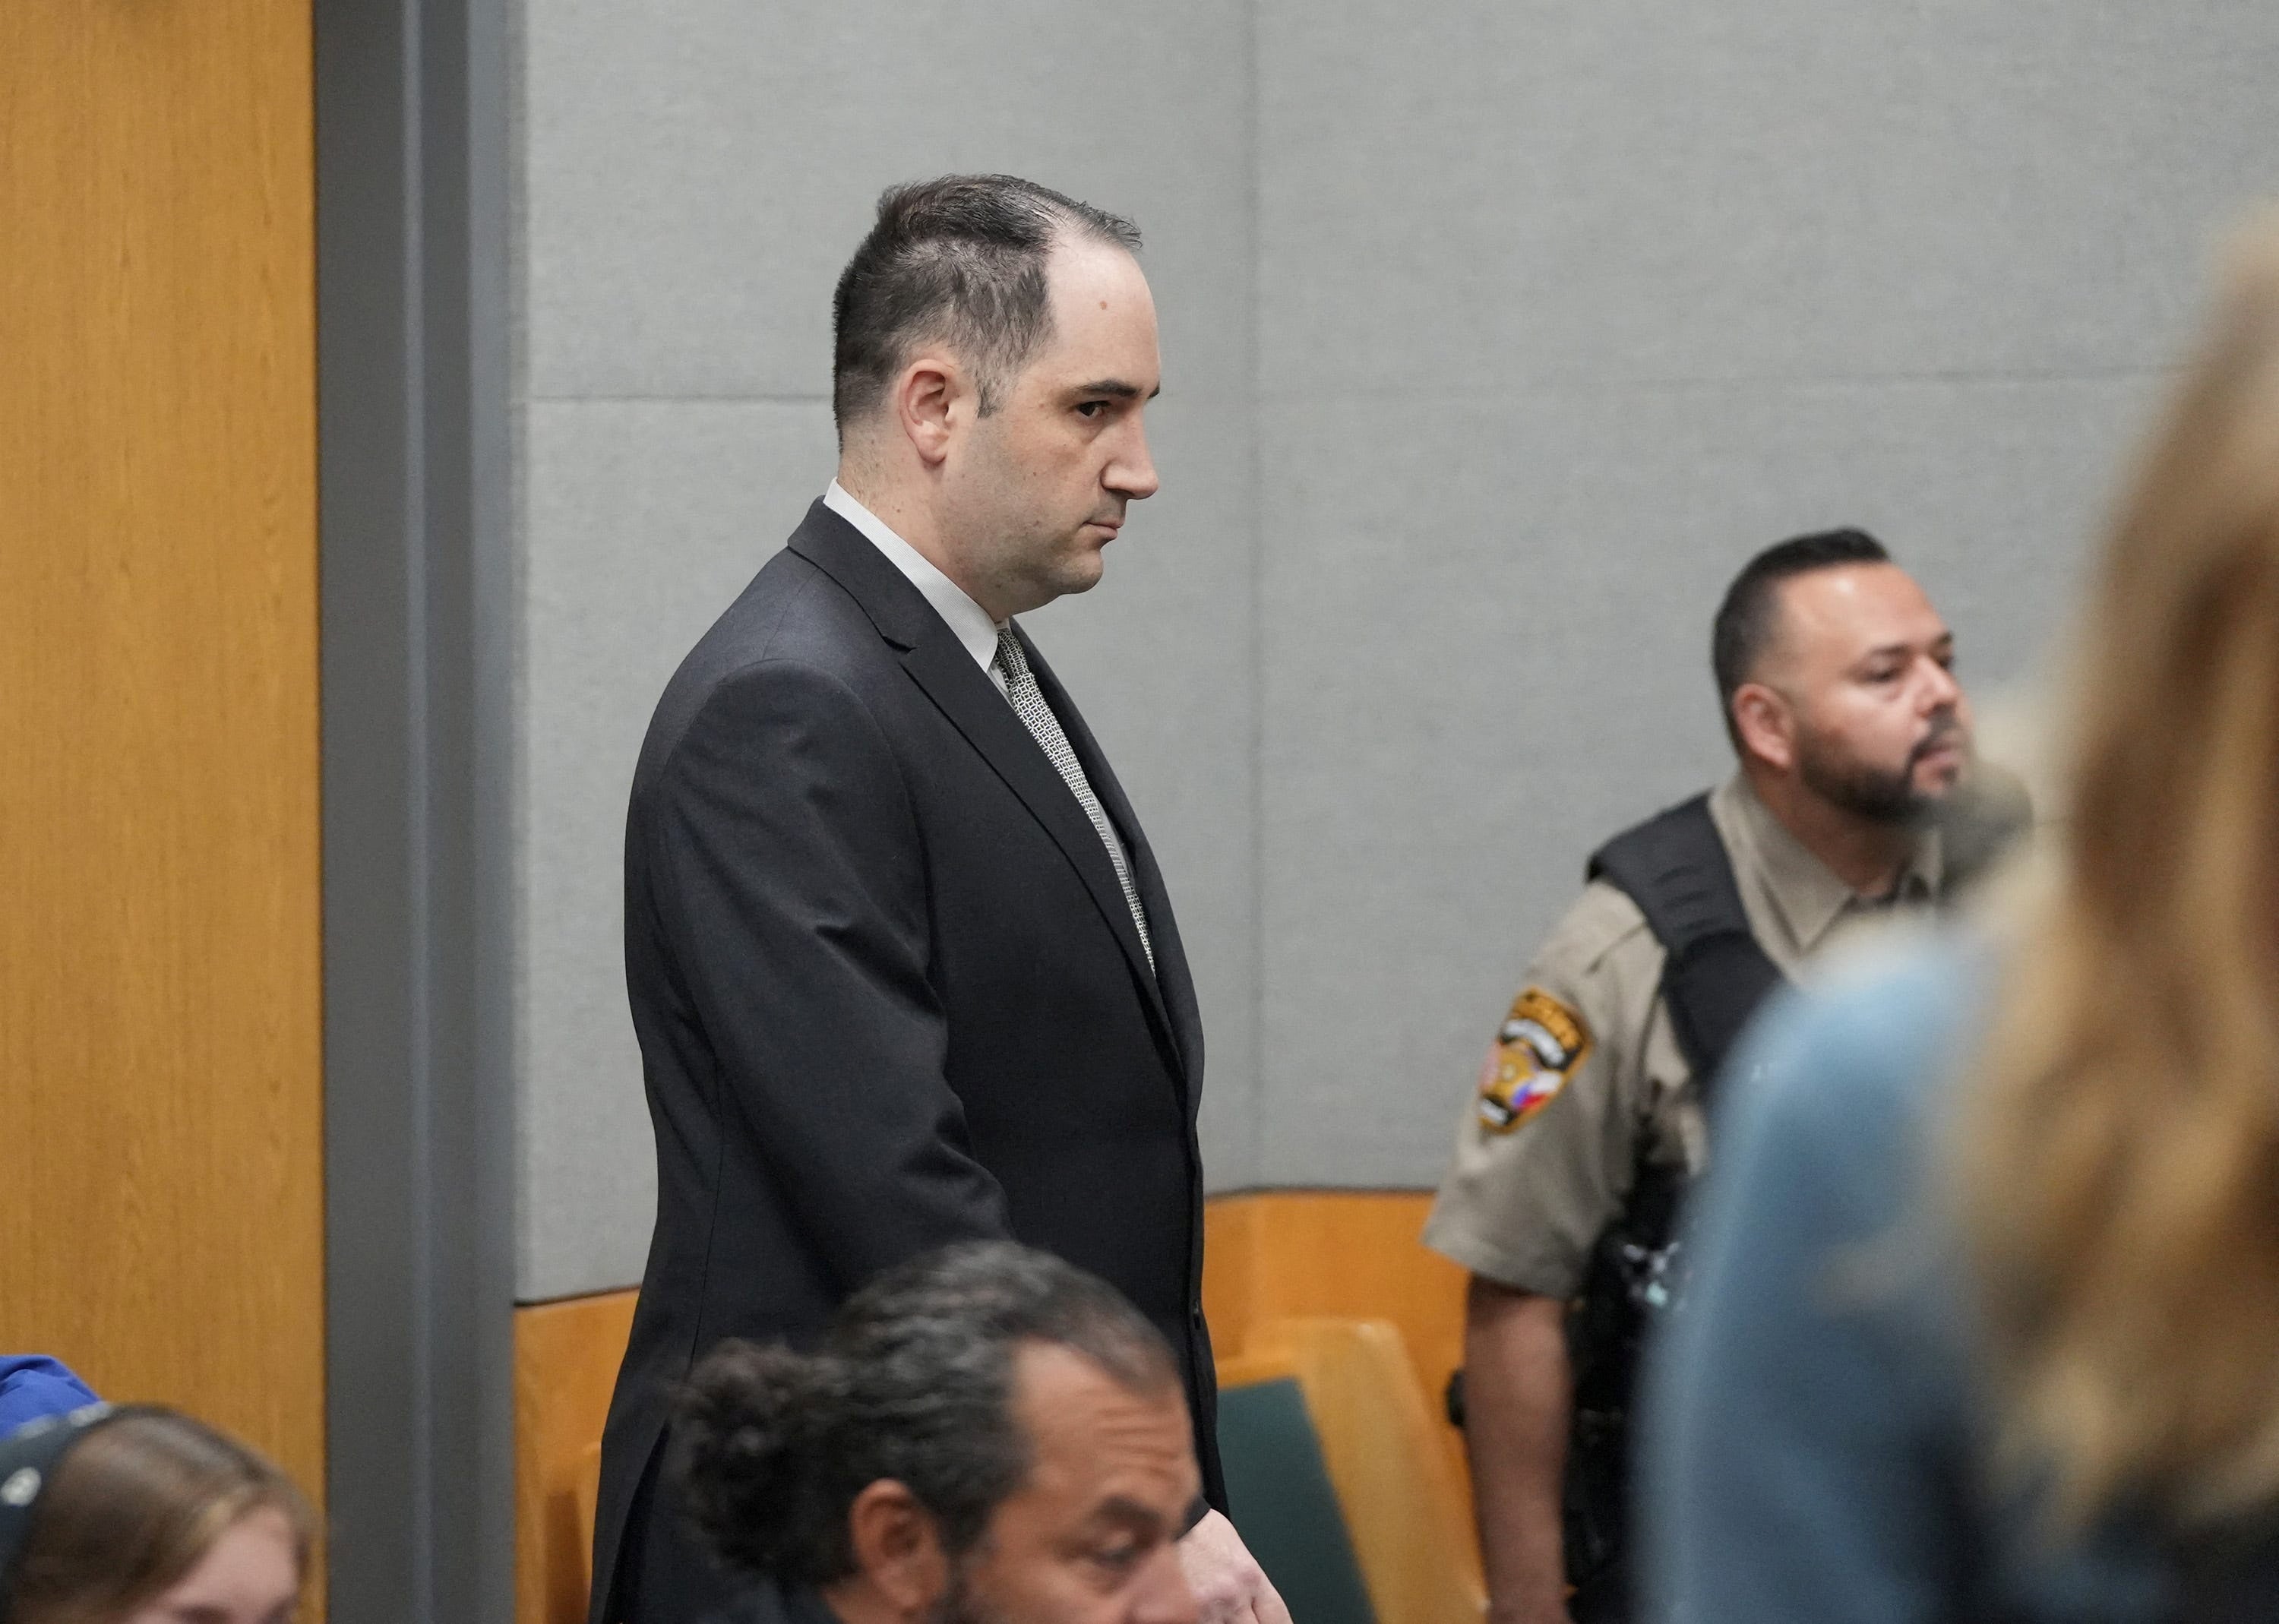 Daniel Perry walks into the courtroom moments before he was convicted of murder in the July 2020 shooting death of Garrett Foster at a Black Lives Matter protest